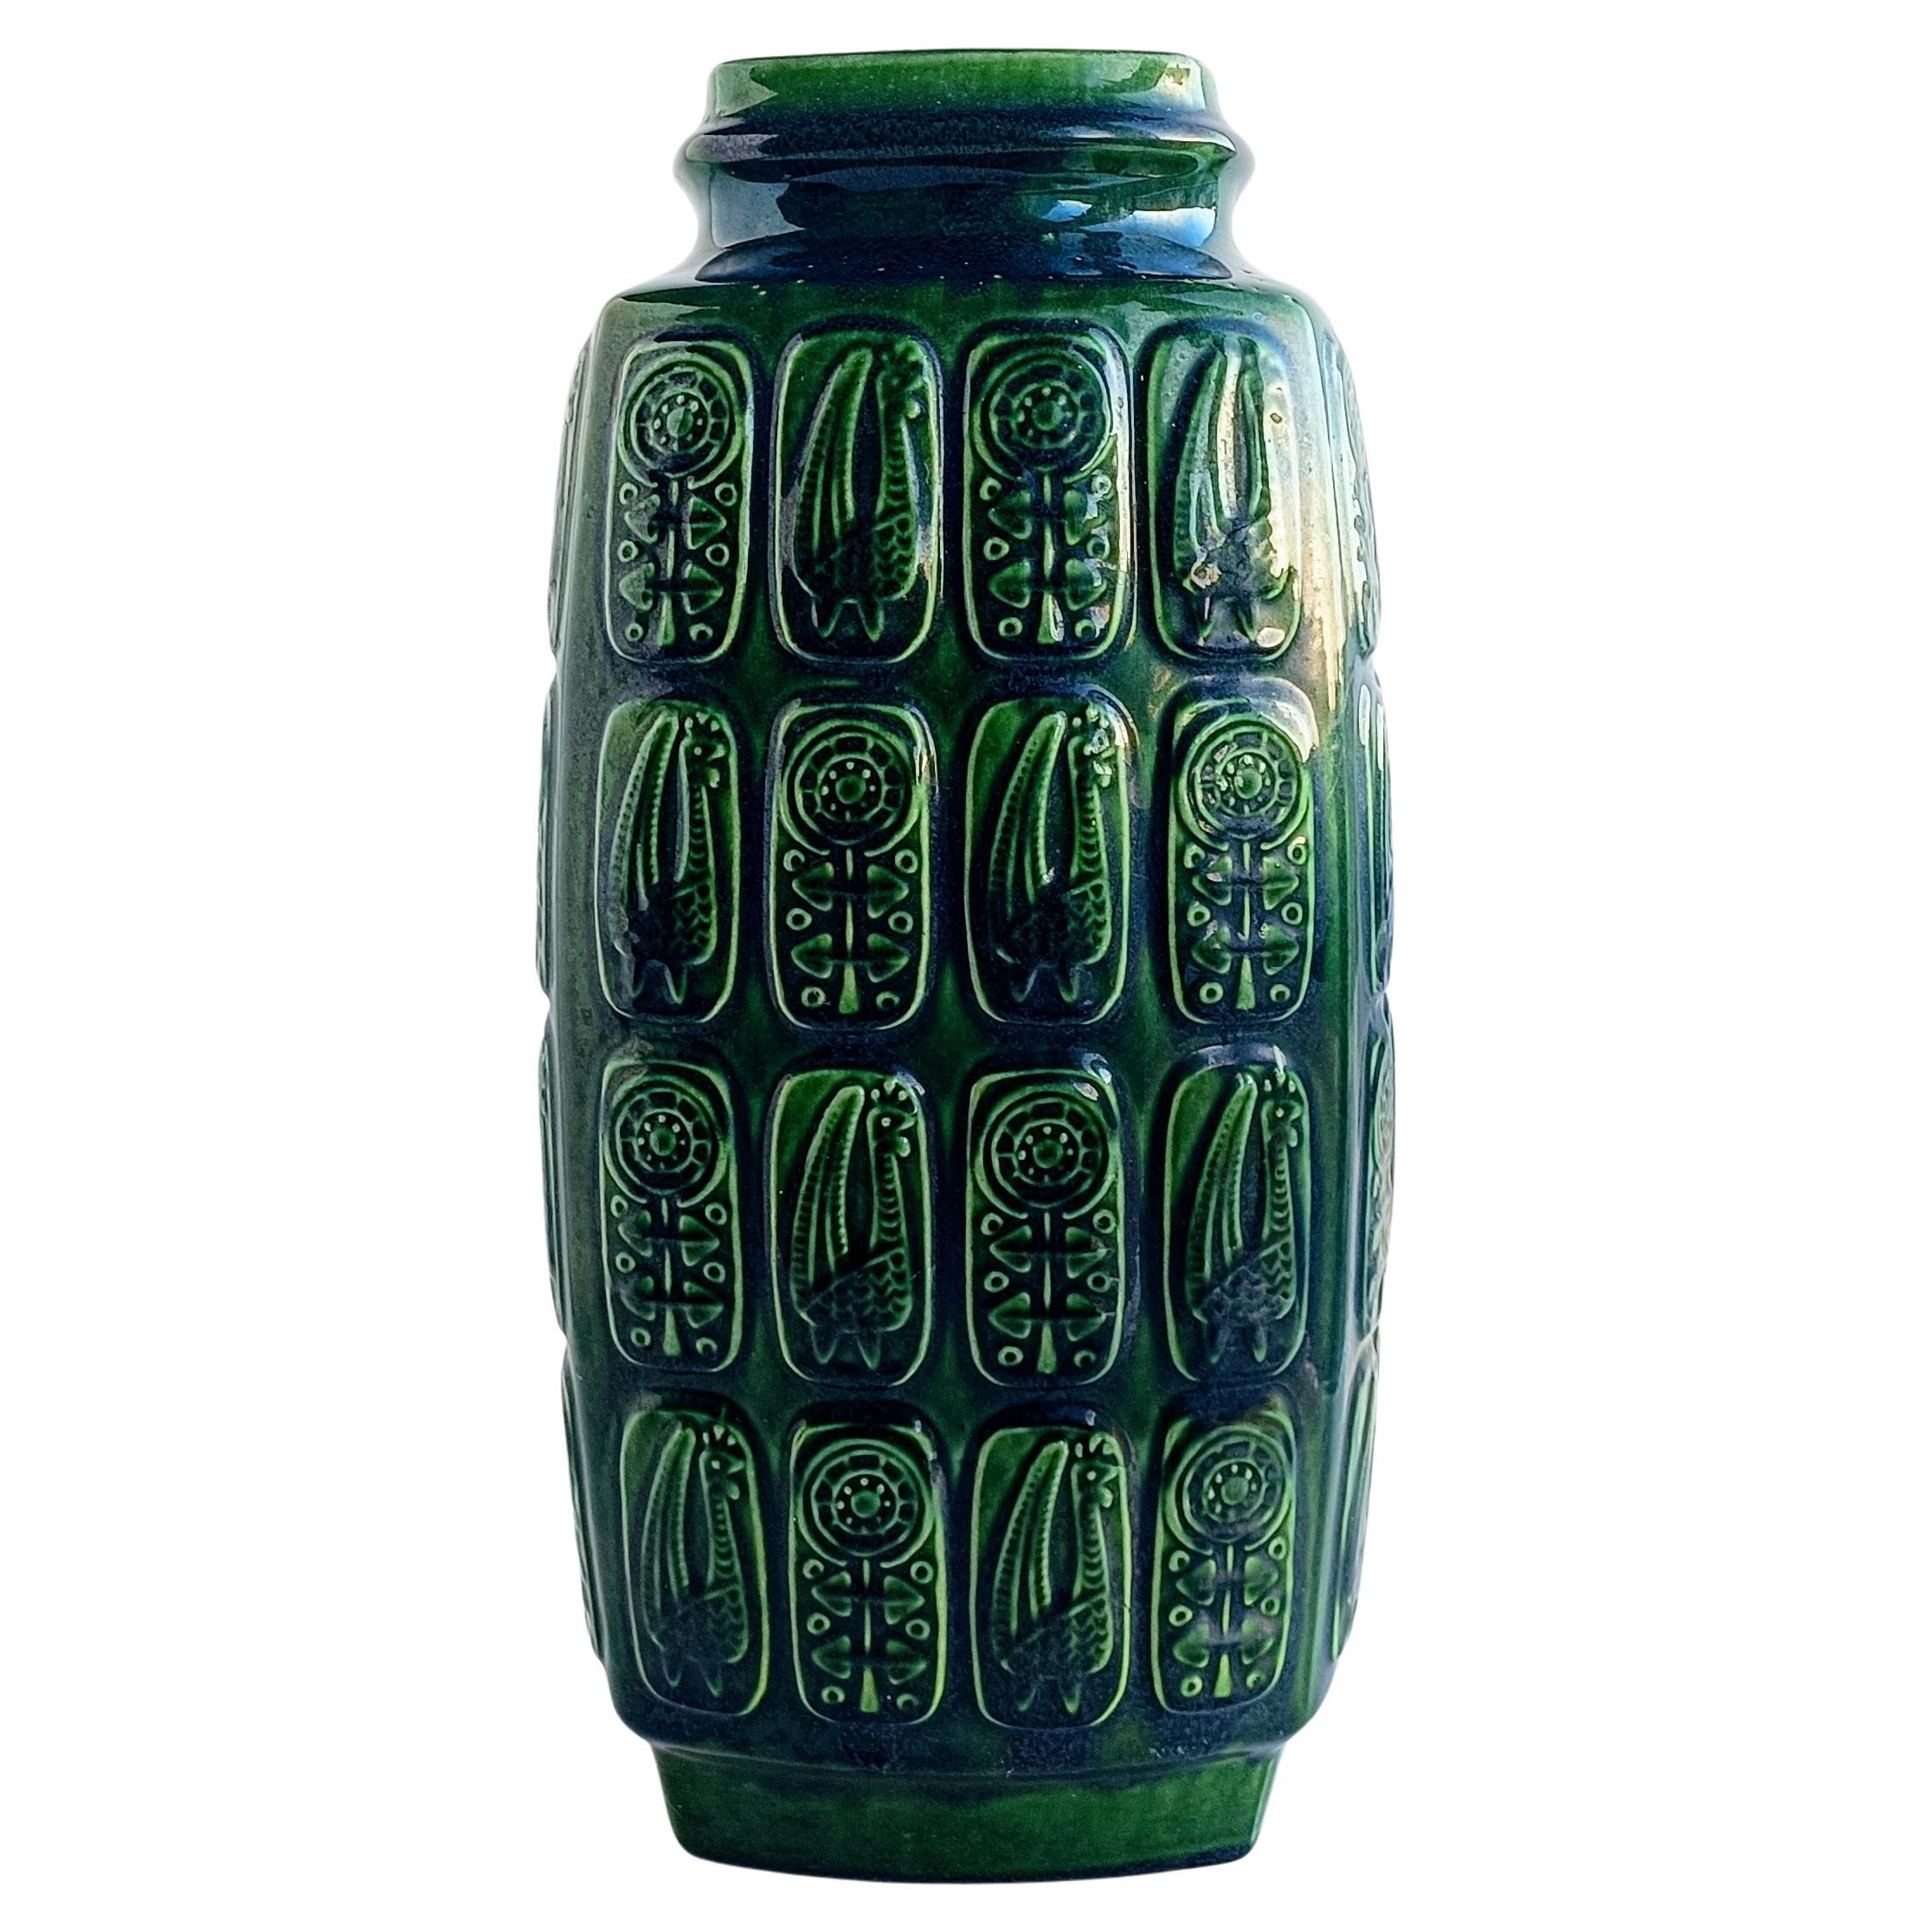 Beautiful extra large West German pottery floor vase created by house designer Bodo Mans featuring the  very rare ¨Pharaon Decor¨ in a green forest hue glaze. Hand-produced in West Germany circa the 1960s. 

Coded and marked Bay, form 942 - 45. The